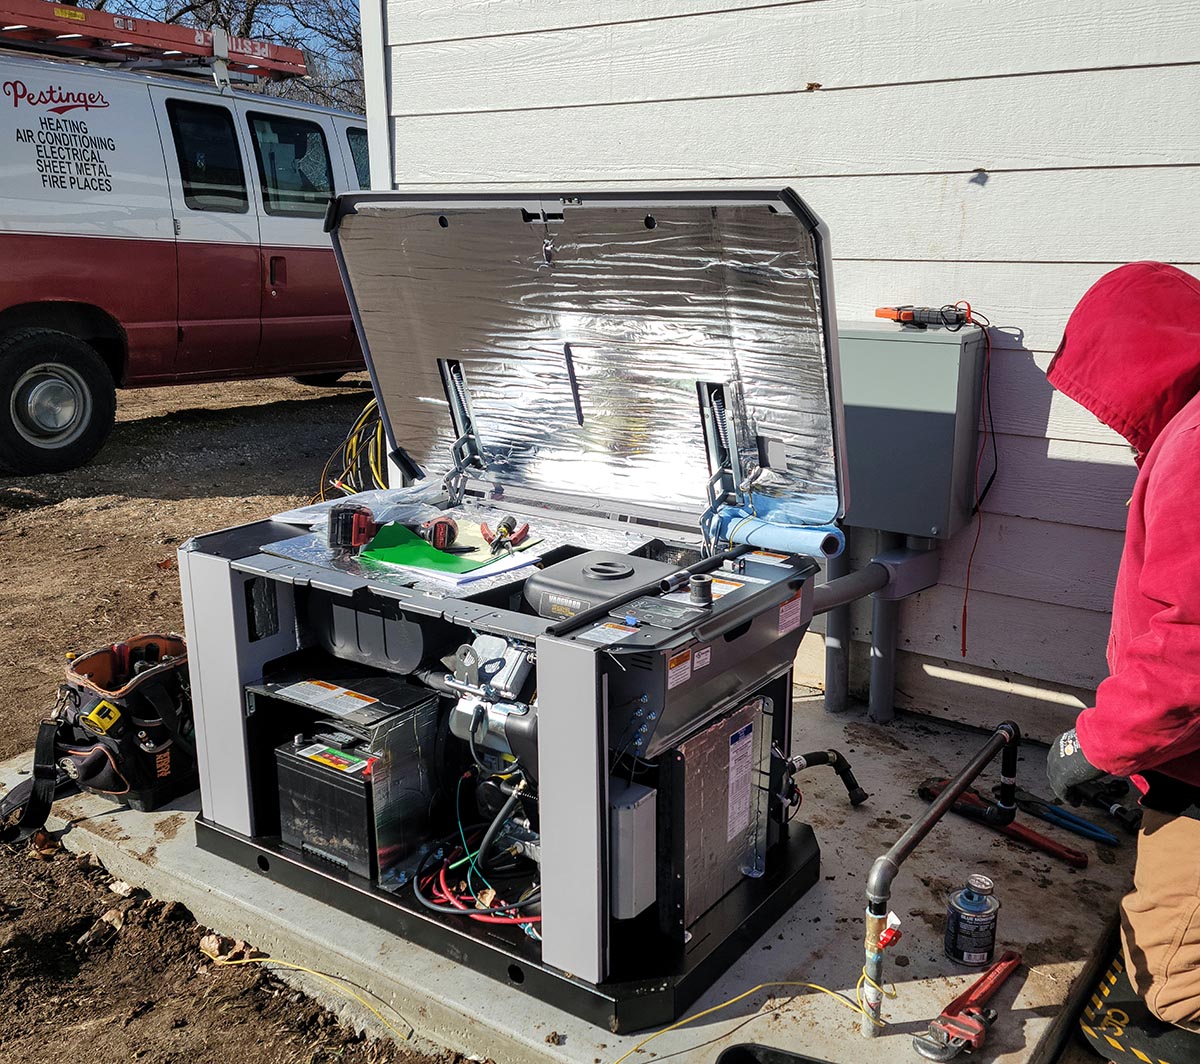 Briggs and Stratton Standby Generator Review